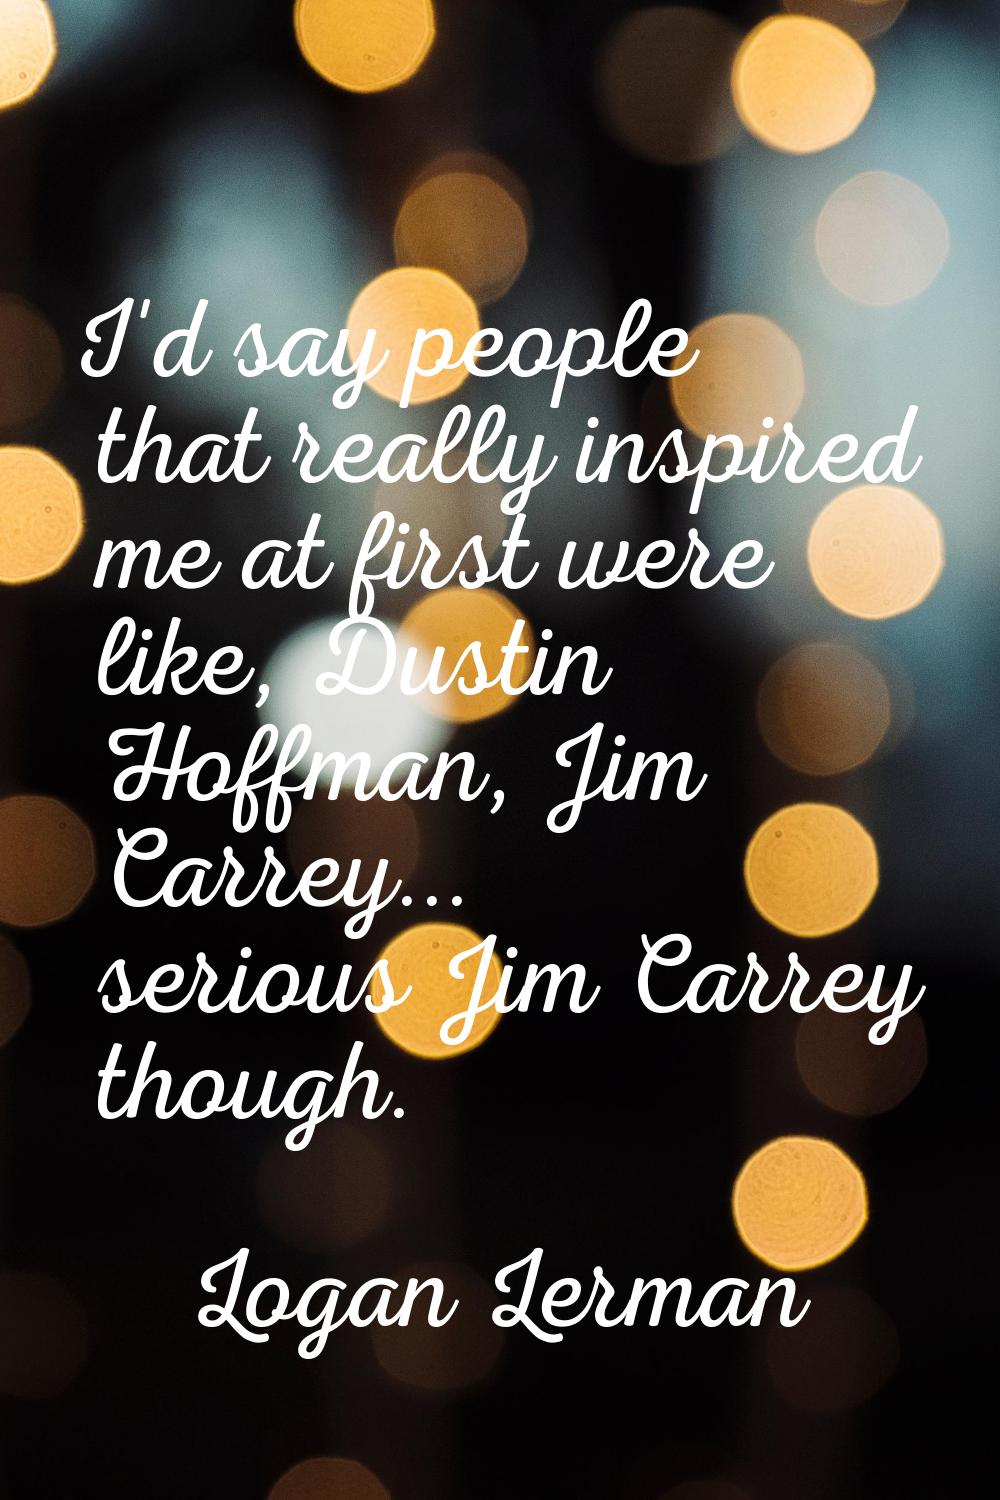 I'd say people that really inspired me at first were like, Dustin Hoffman, Jim Carrey... serious Ji